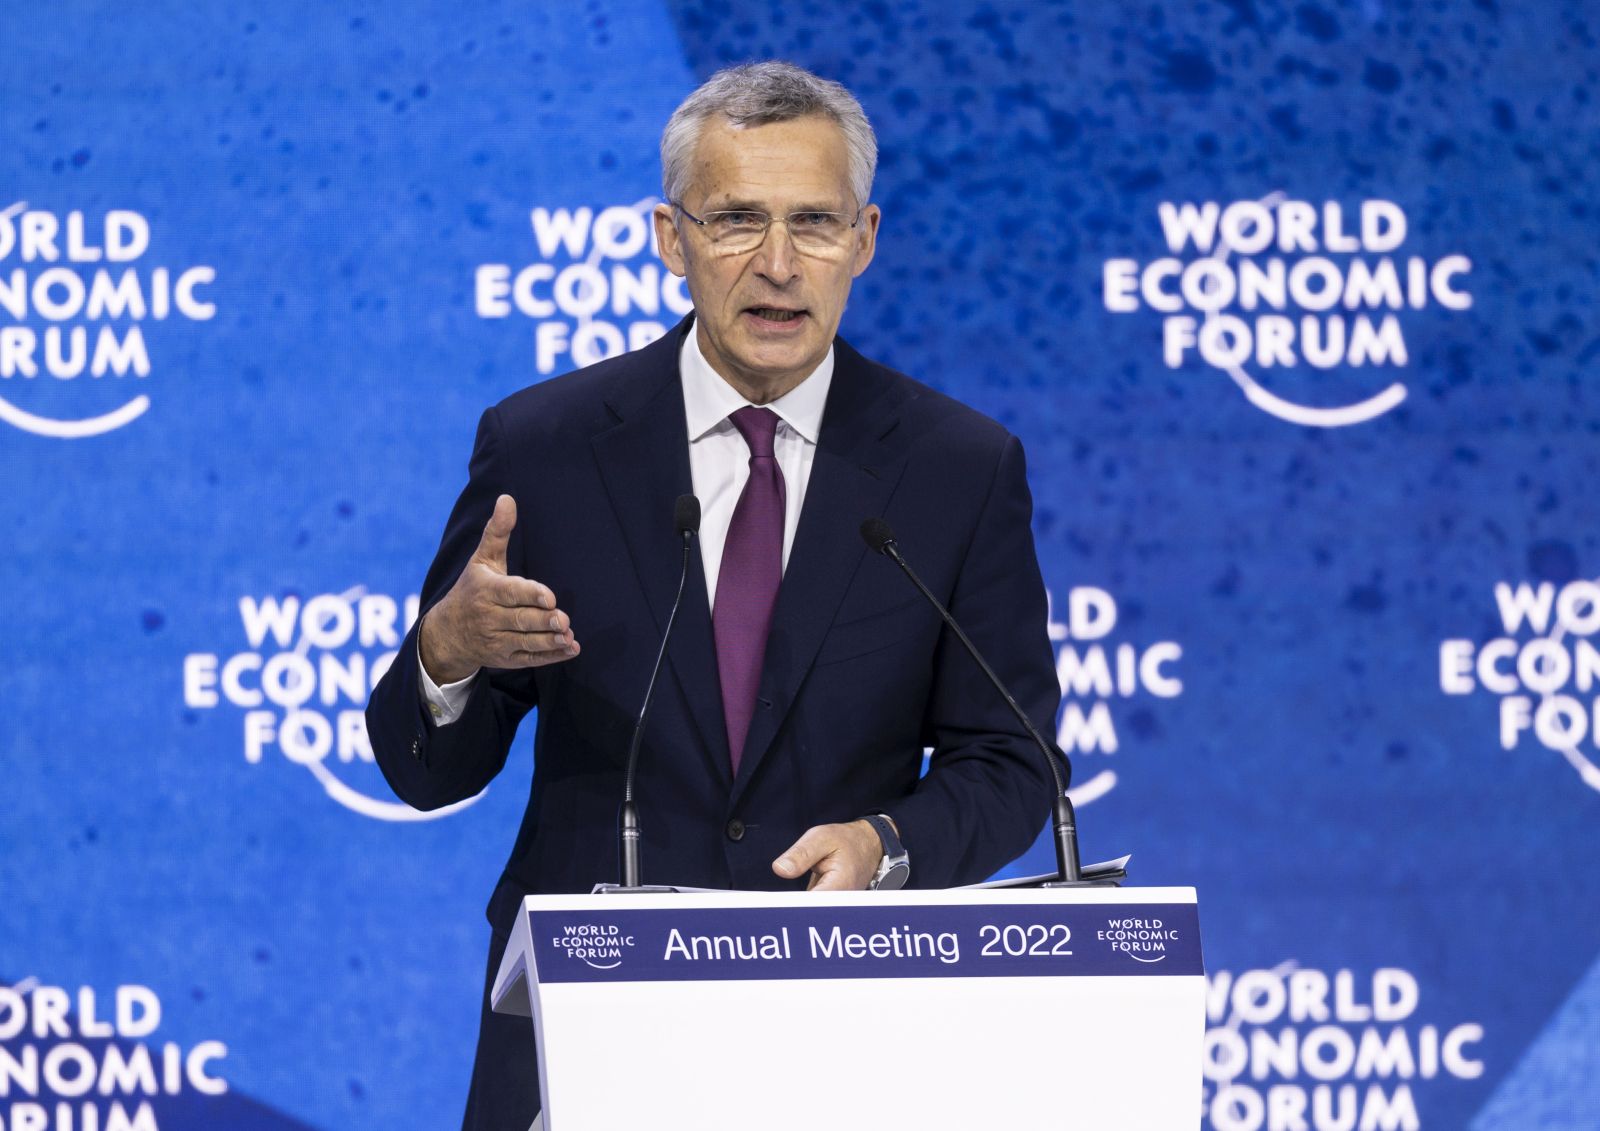 epa09971226 North Atlantic Treaty Organization (NATO) Secretary-General Jens Stoltenberg addresses a panel session during the 51st annual meeting of the World Economic Forum (WEF) in Davos, Switzerland, 24 May 2022. The forum has been postponed due to the COVID-19 pandemic and was rescheduled to early summer. The meeting brings together entrepreneurs, scientists, corporate and political leaders in Davos under the topic 'History at a Turning Point: Government Policies and Business Strategies' from 22 to 26 May 2022.  EPA/GIAN EHRENZELLER